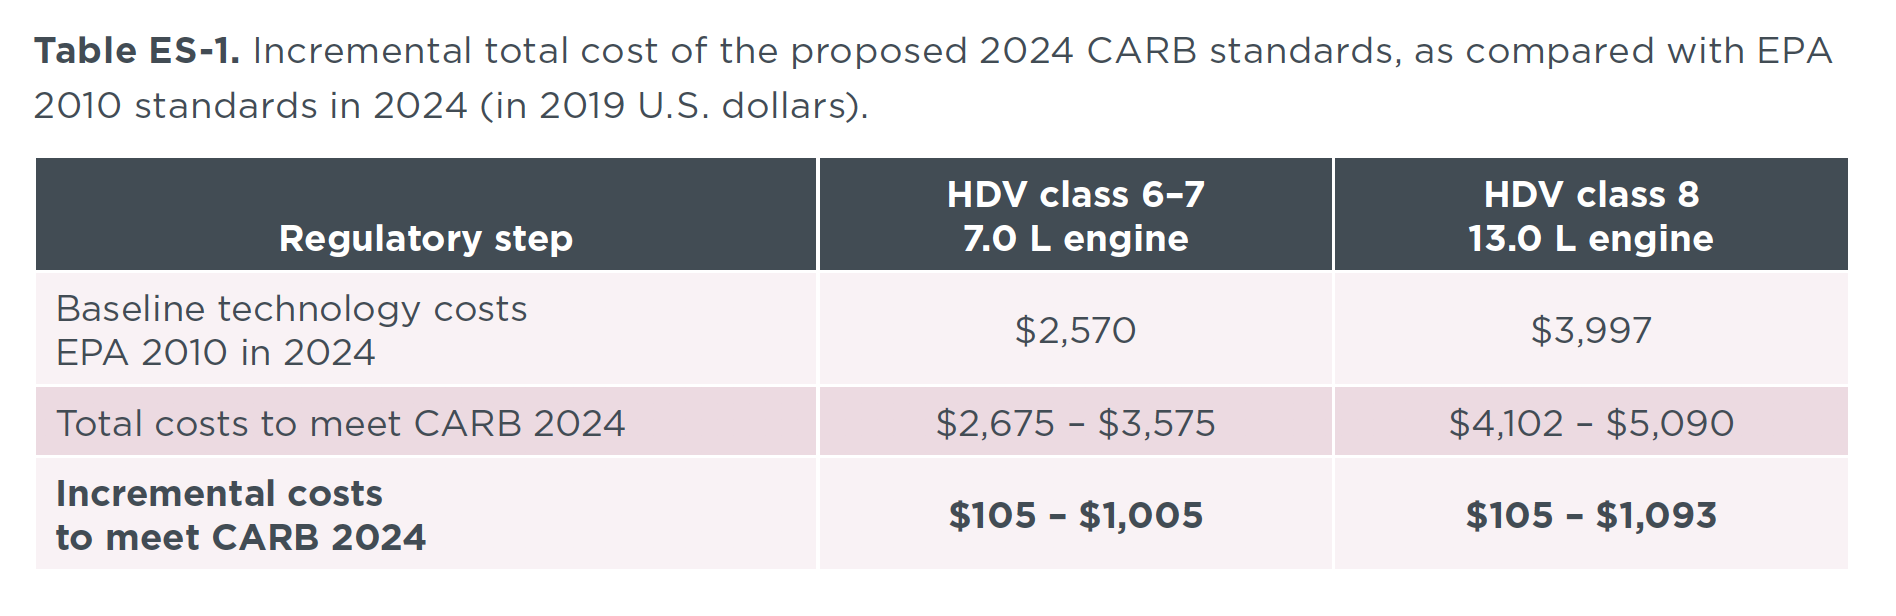 Table ES-1. Incremental total cost of the proposed 2024 CARB standards, as compared with EPA 2010 standards in 2024 (in 2019 U.S. dollars).